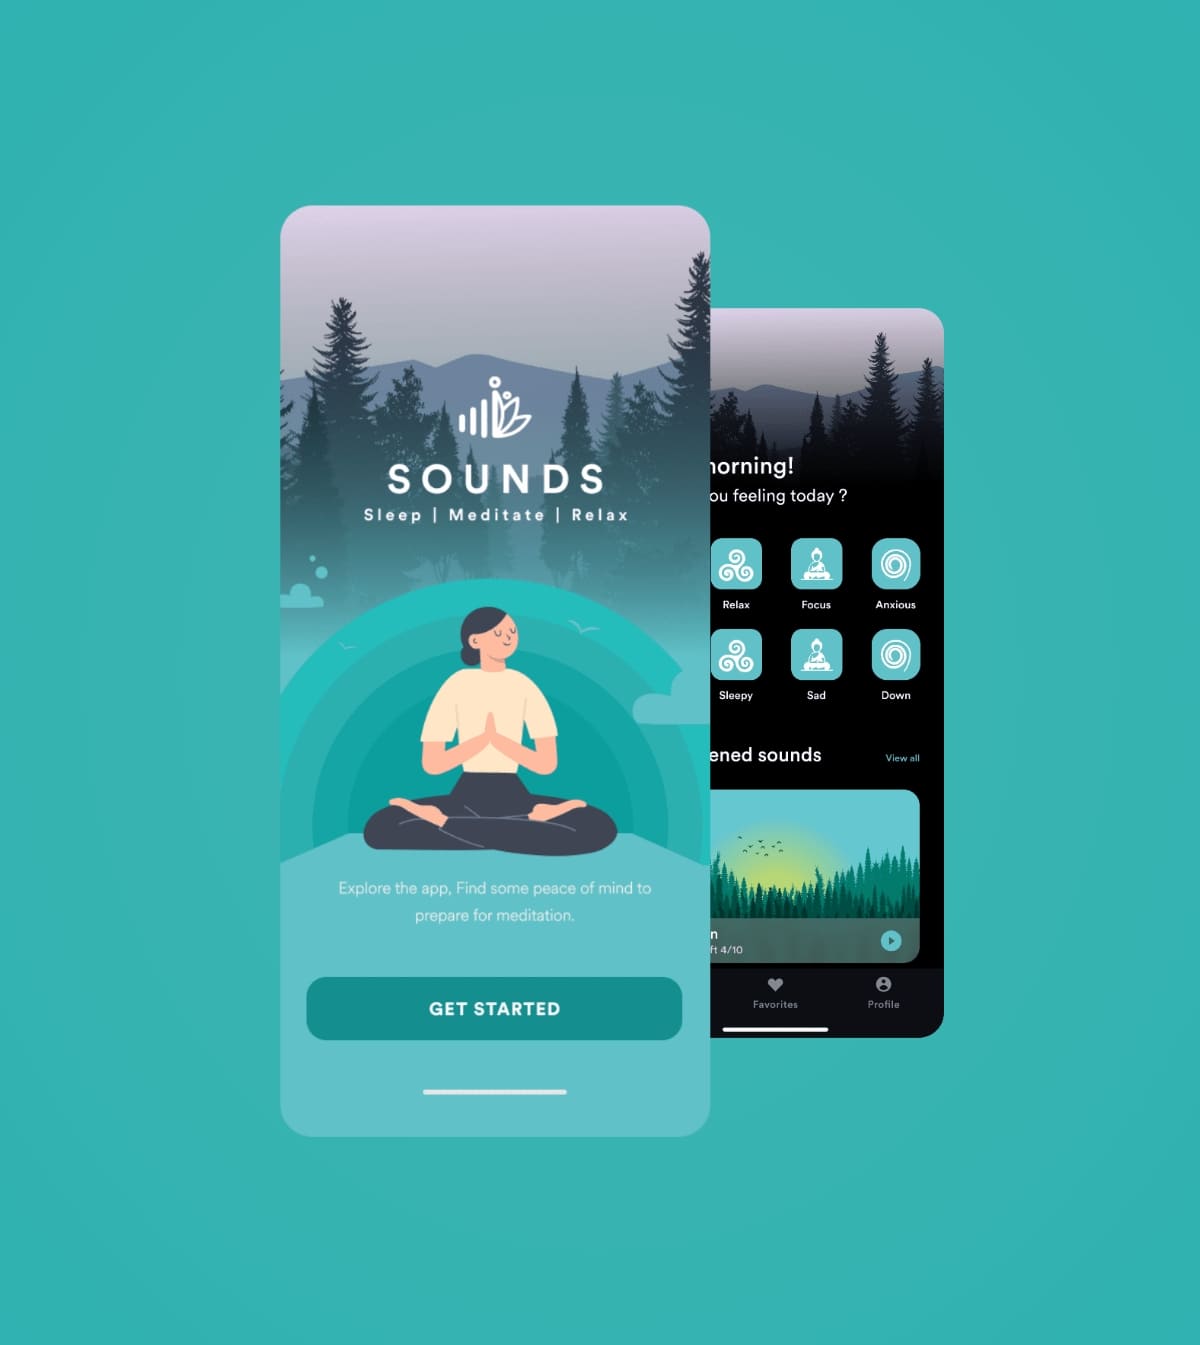 Sounds App for Meditation, Relaxation and Sleep